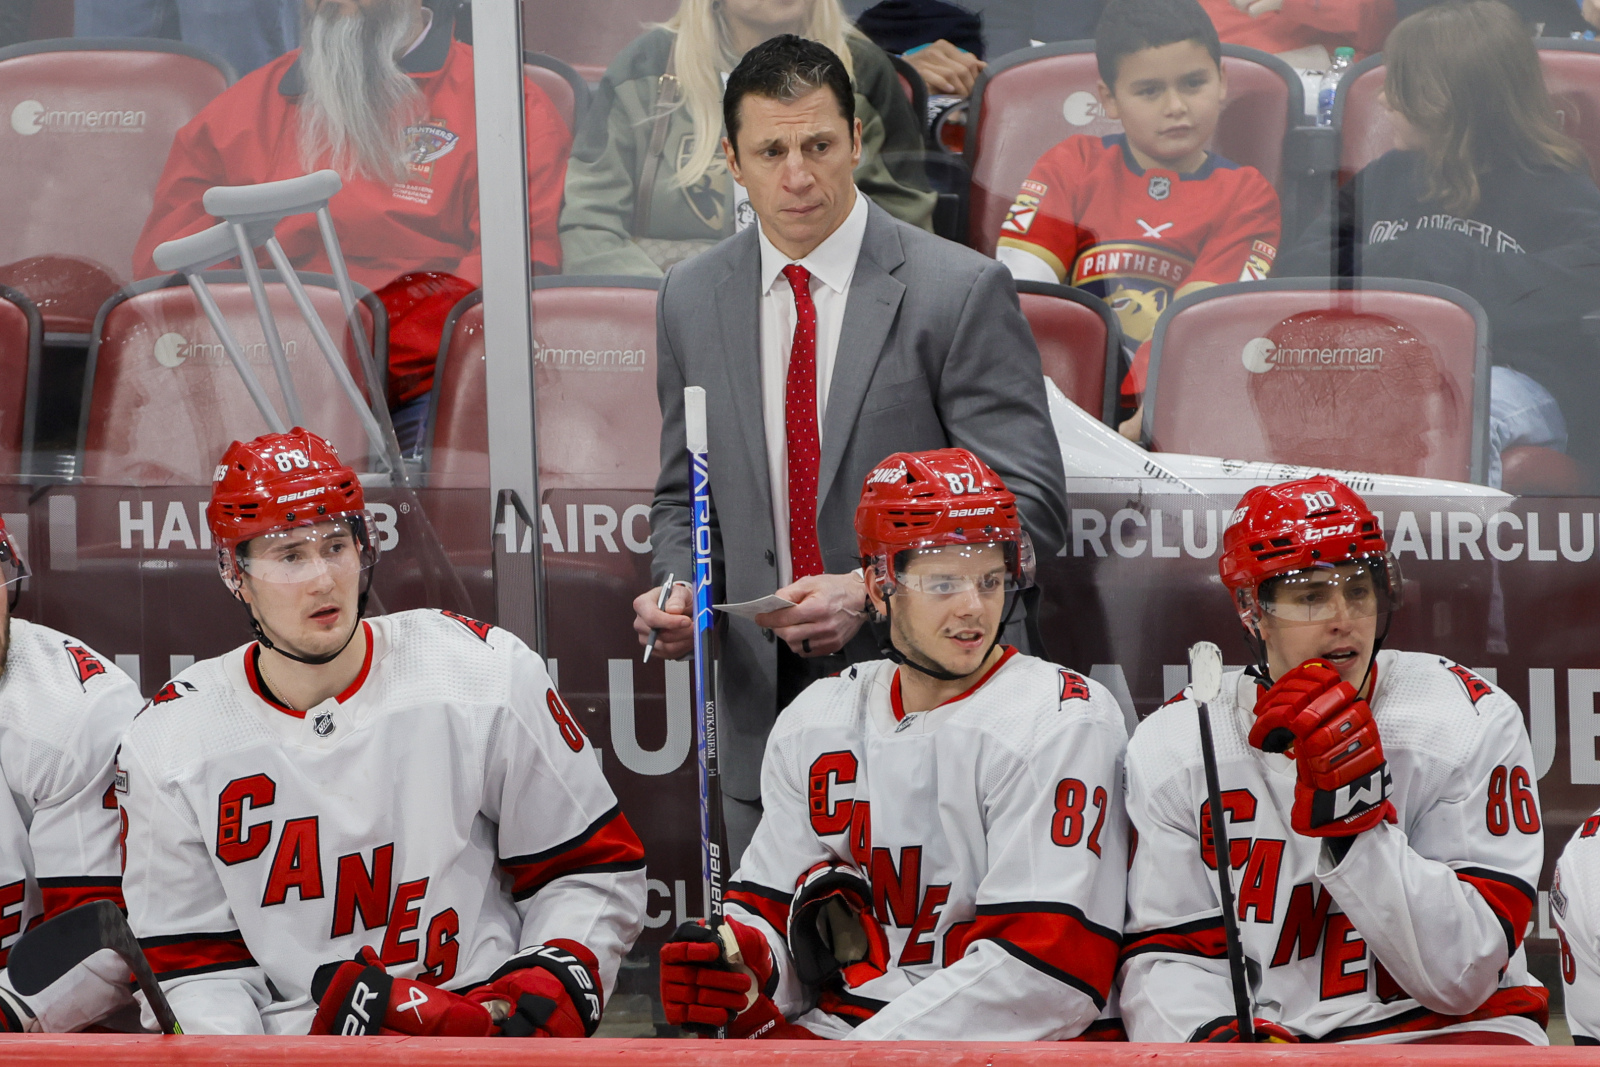 Hurricanes coach Brind'Amour 'moving on' after fined by NHL